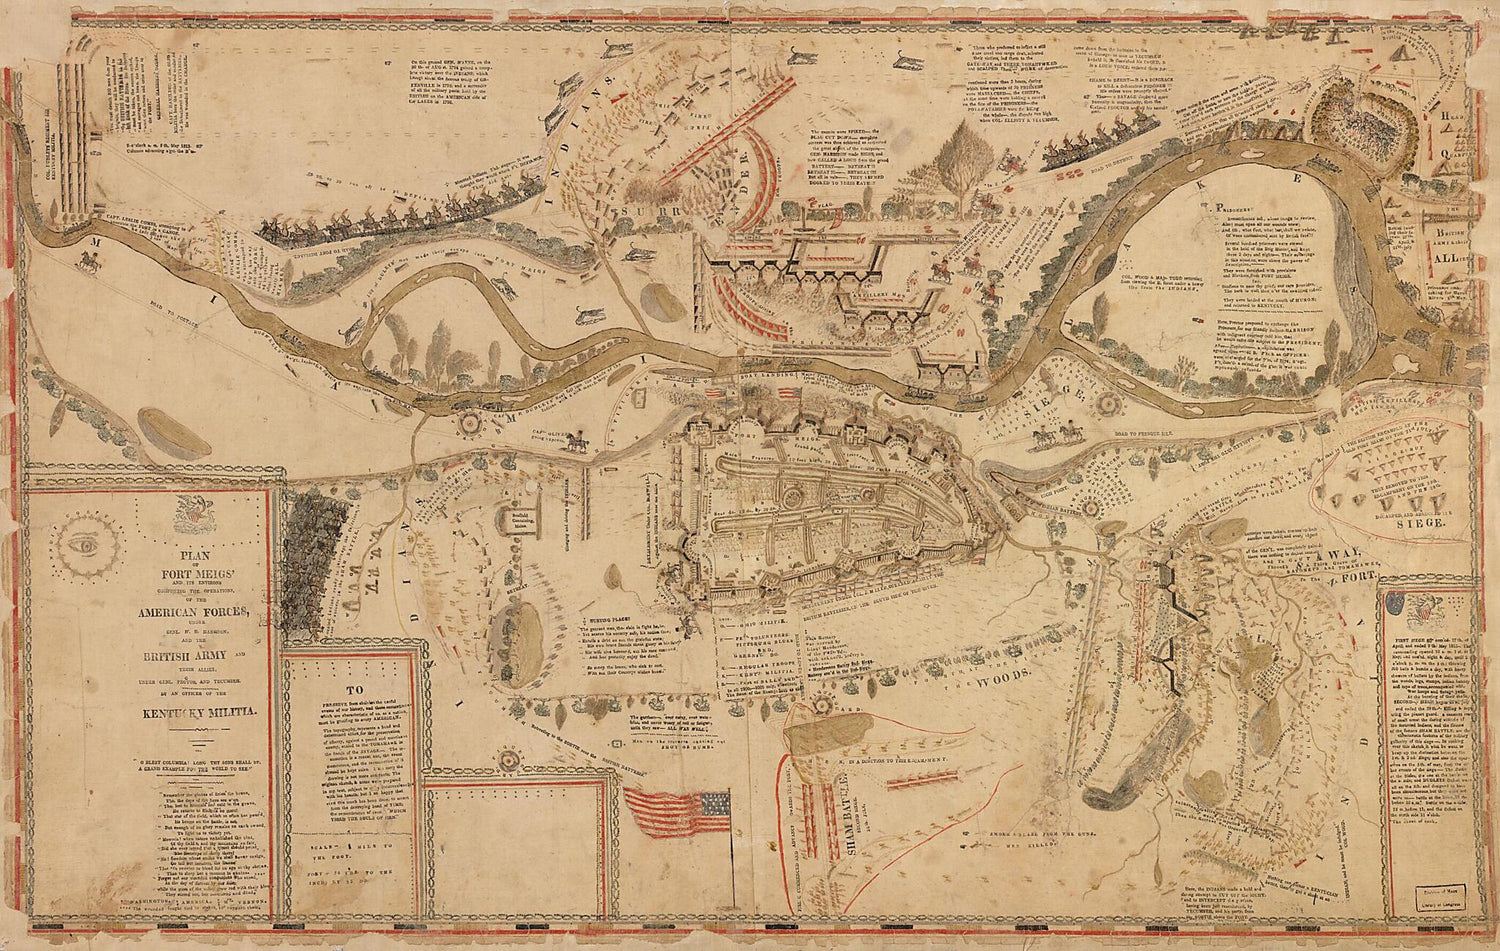 This old map of Plan of Fort Meigs&